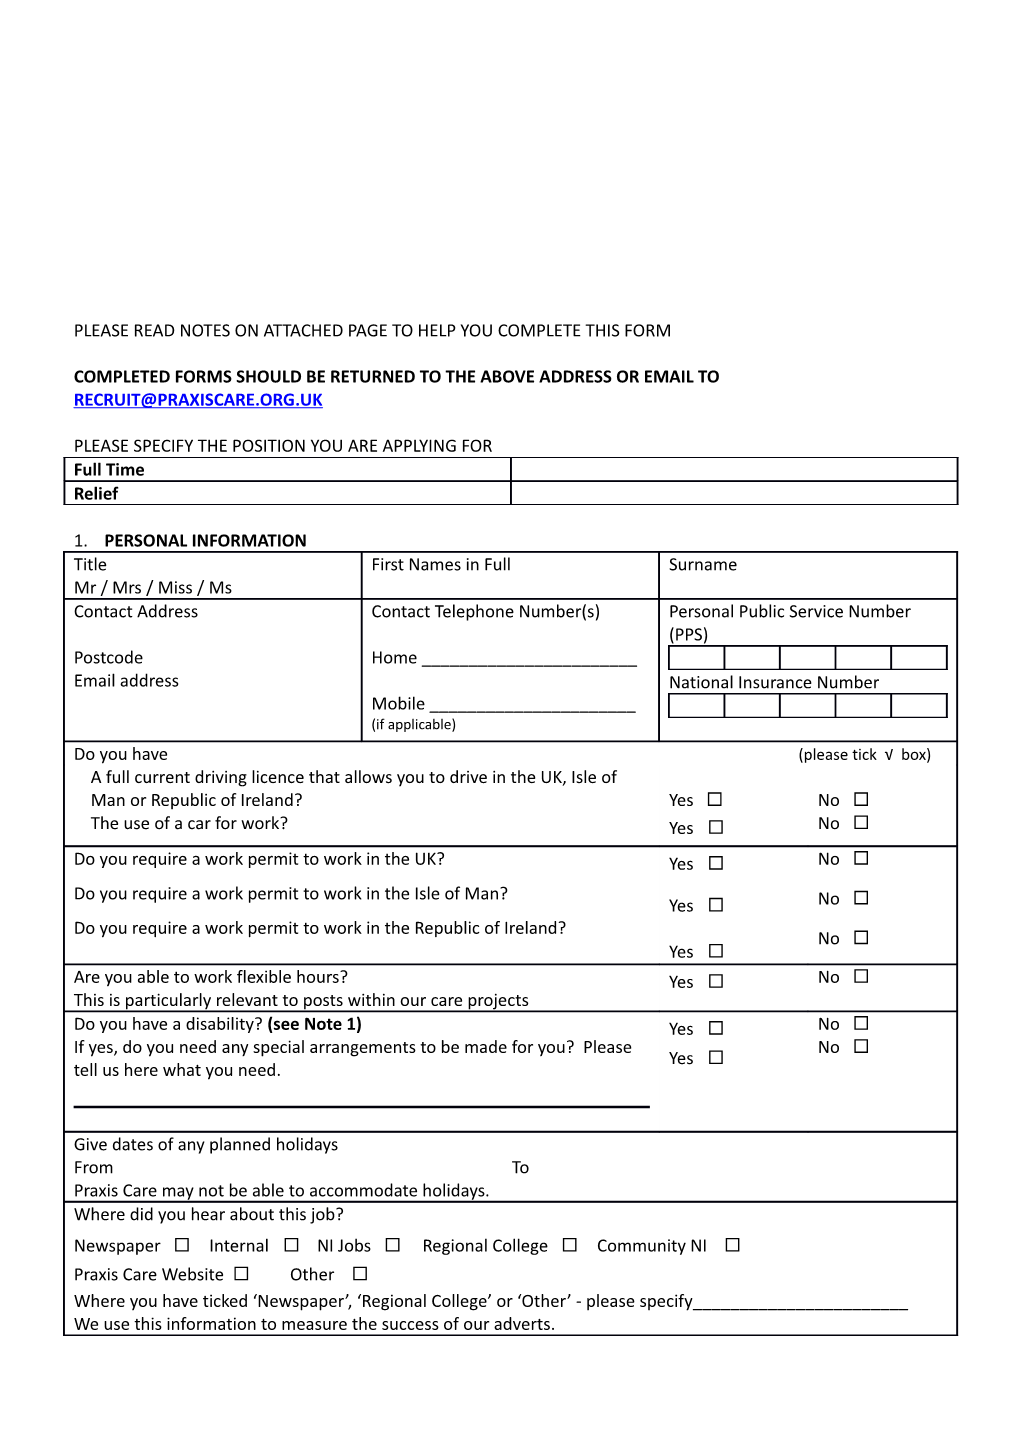 Completed Forms Should Be Returned to the Above Address Or Email To